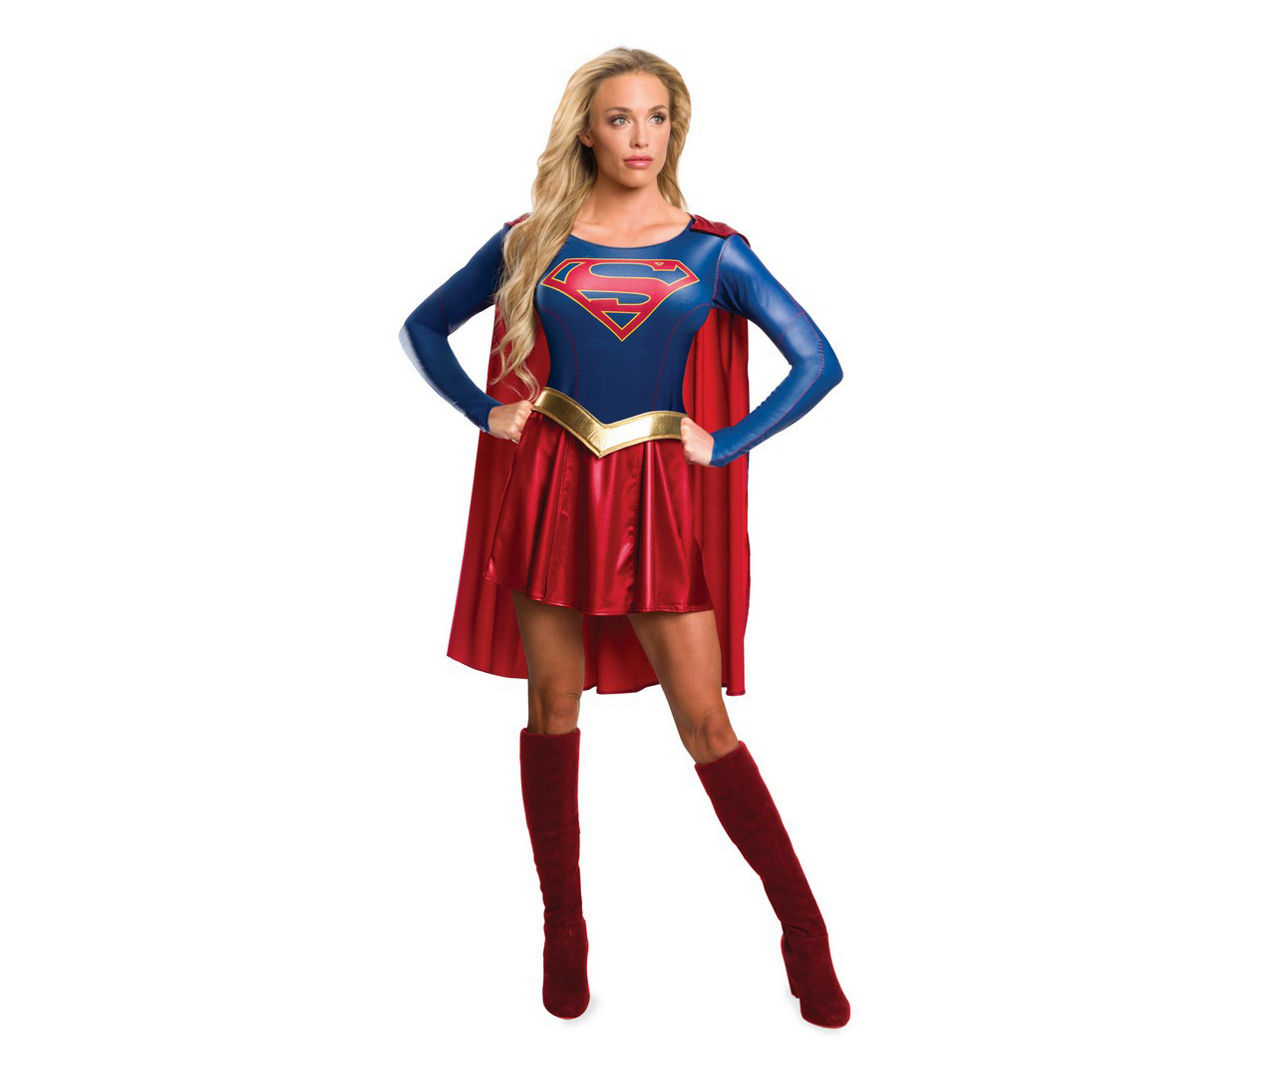 Adult Size S Supergirl TV Costume